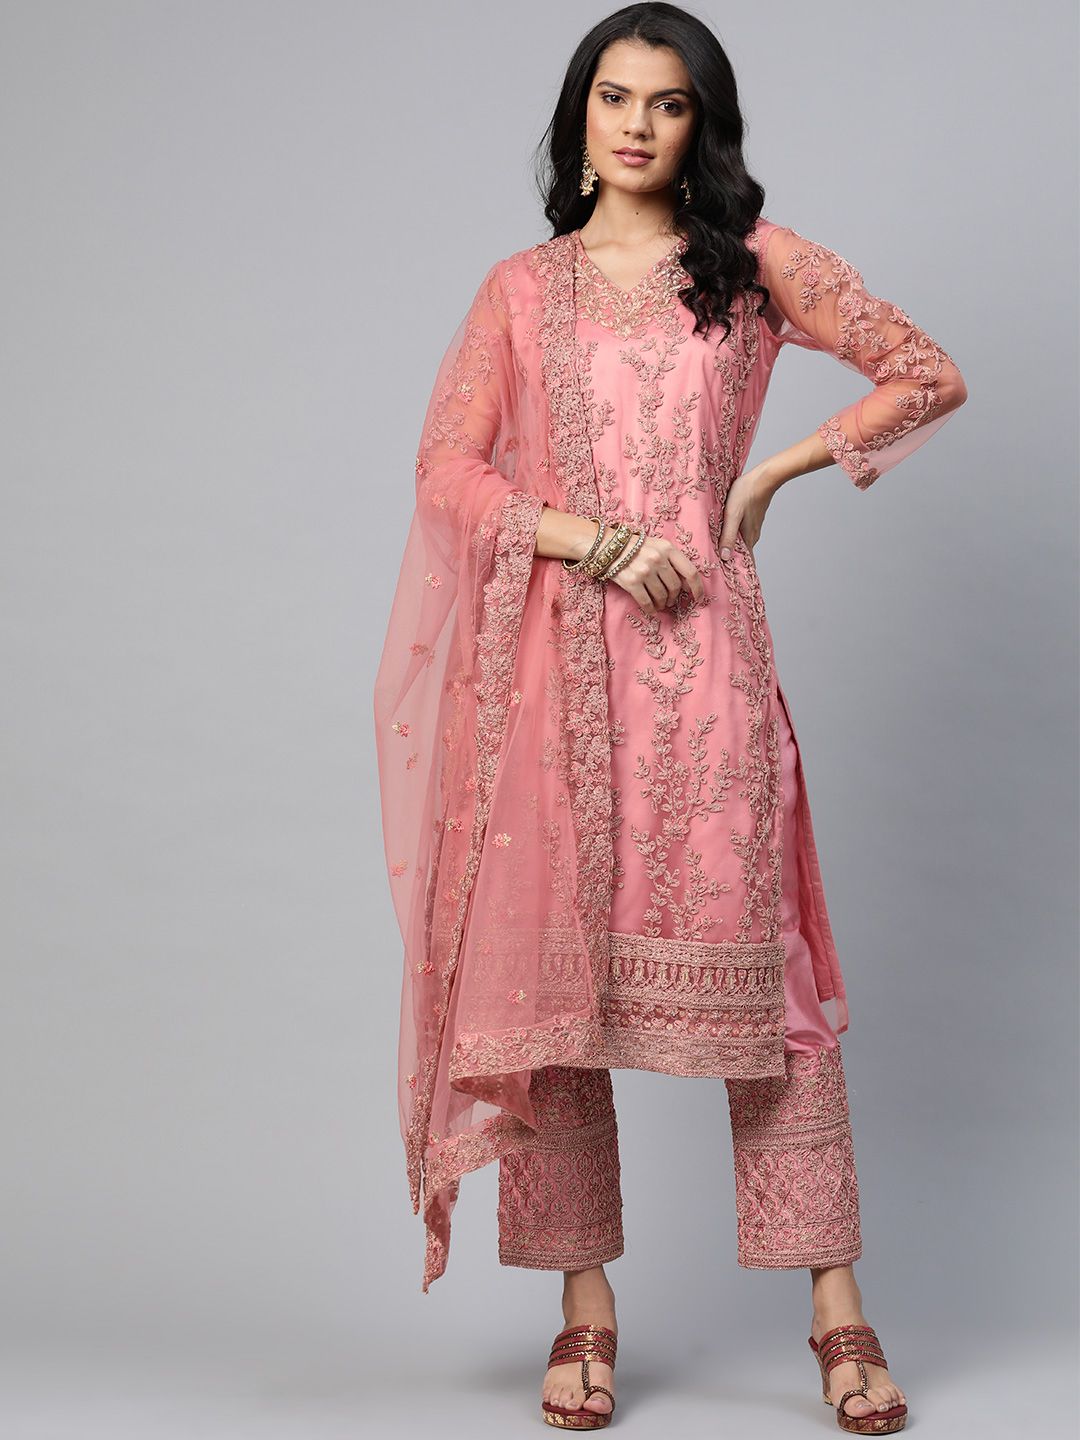 Readiprint Fashions Peach-Coloured & Golden Embroidered Unstitched Dress Material Price in India